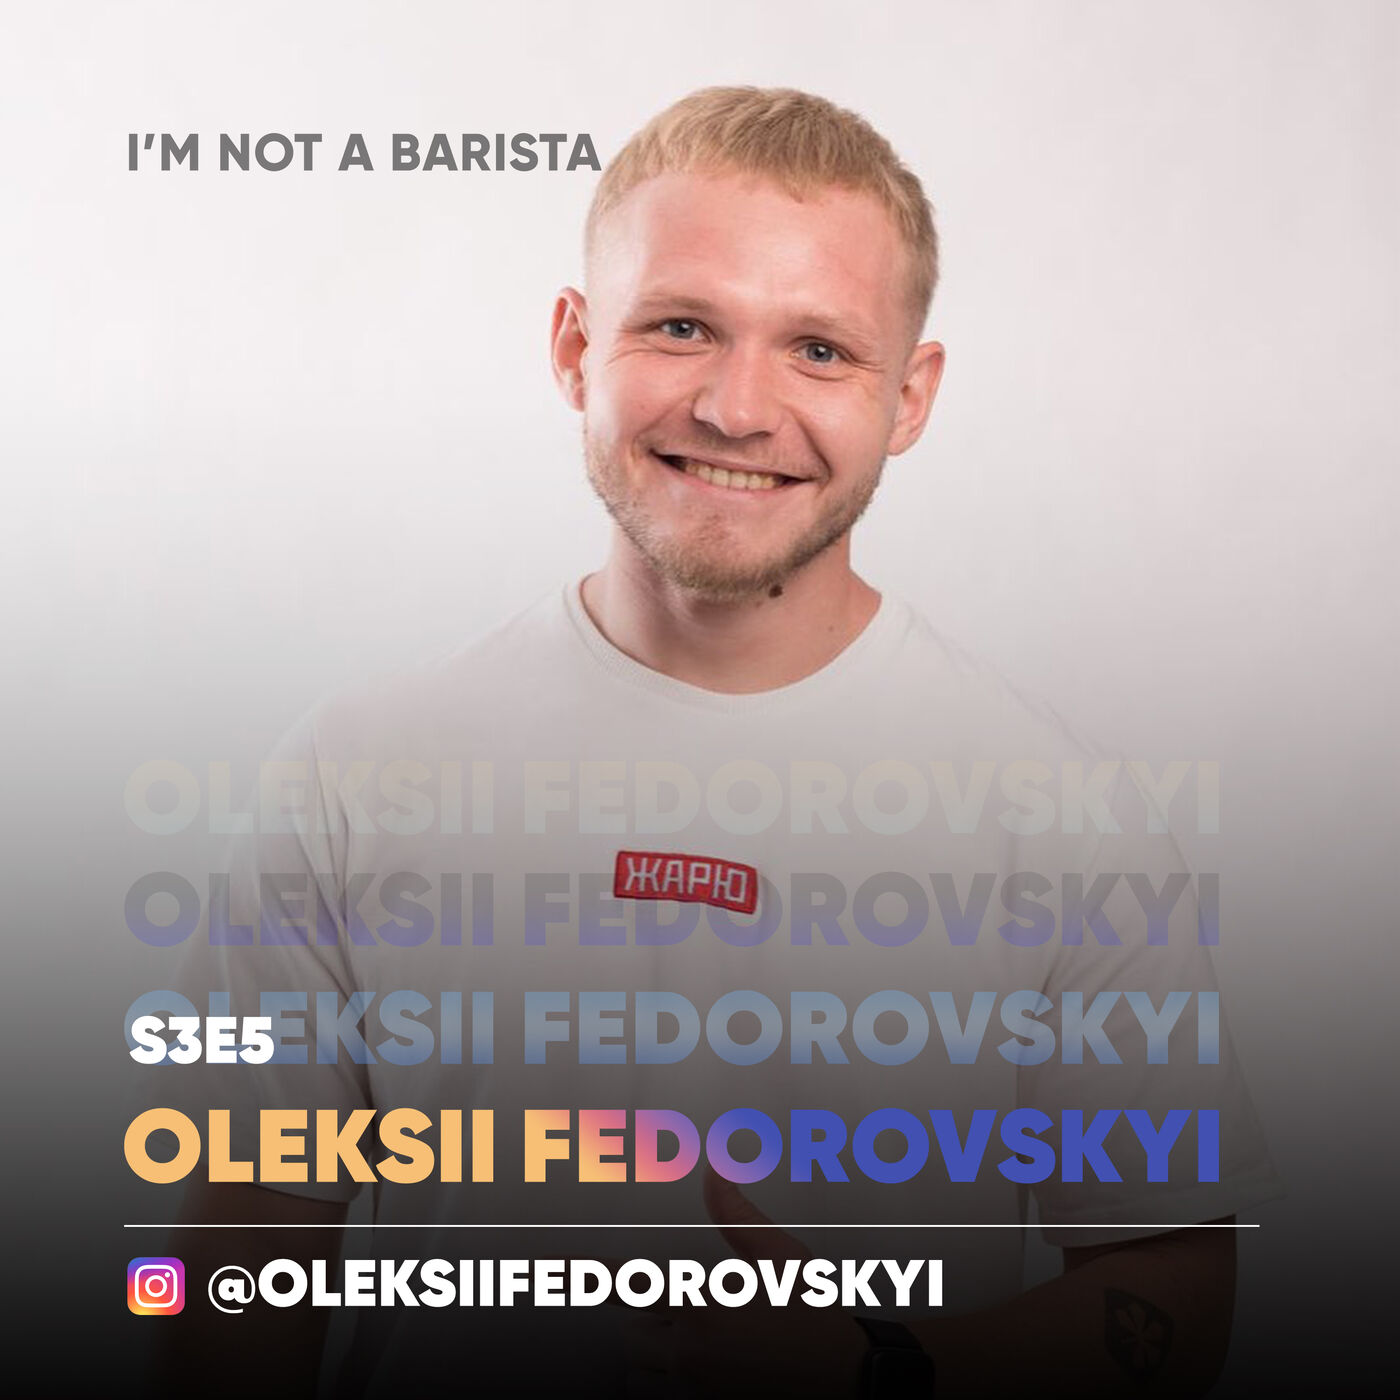 S3E5: Meet Oleksii Fedorovskyi, Ukraine Brewers Cup champ 2016 and 2020, let's talk about coffee in difficult times.